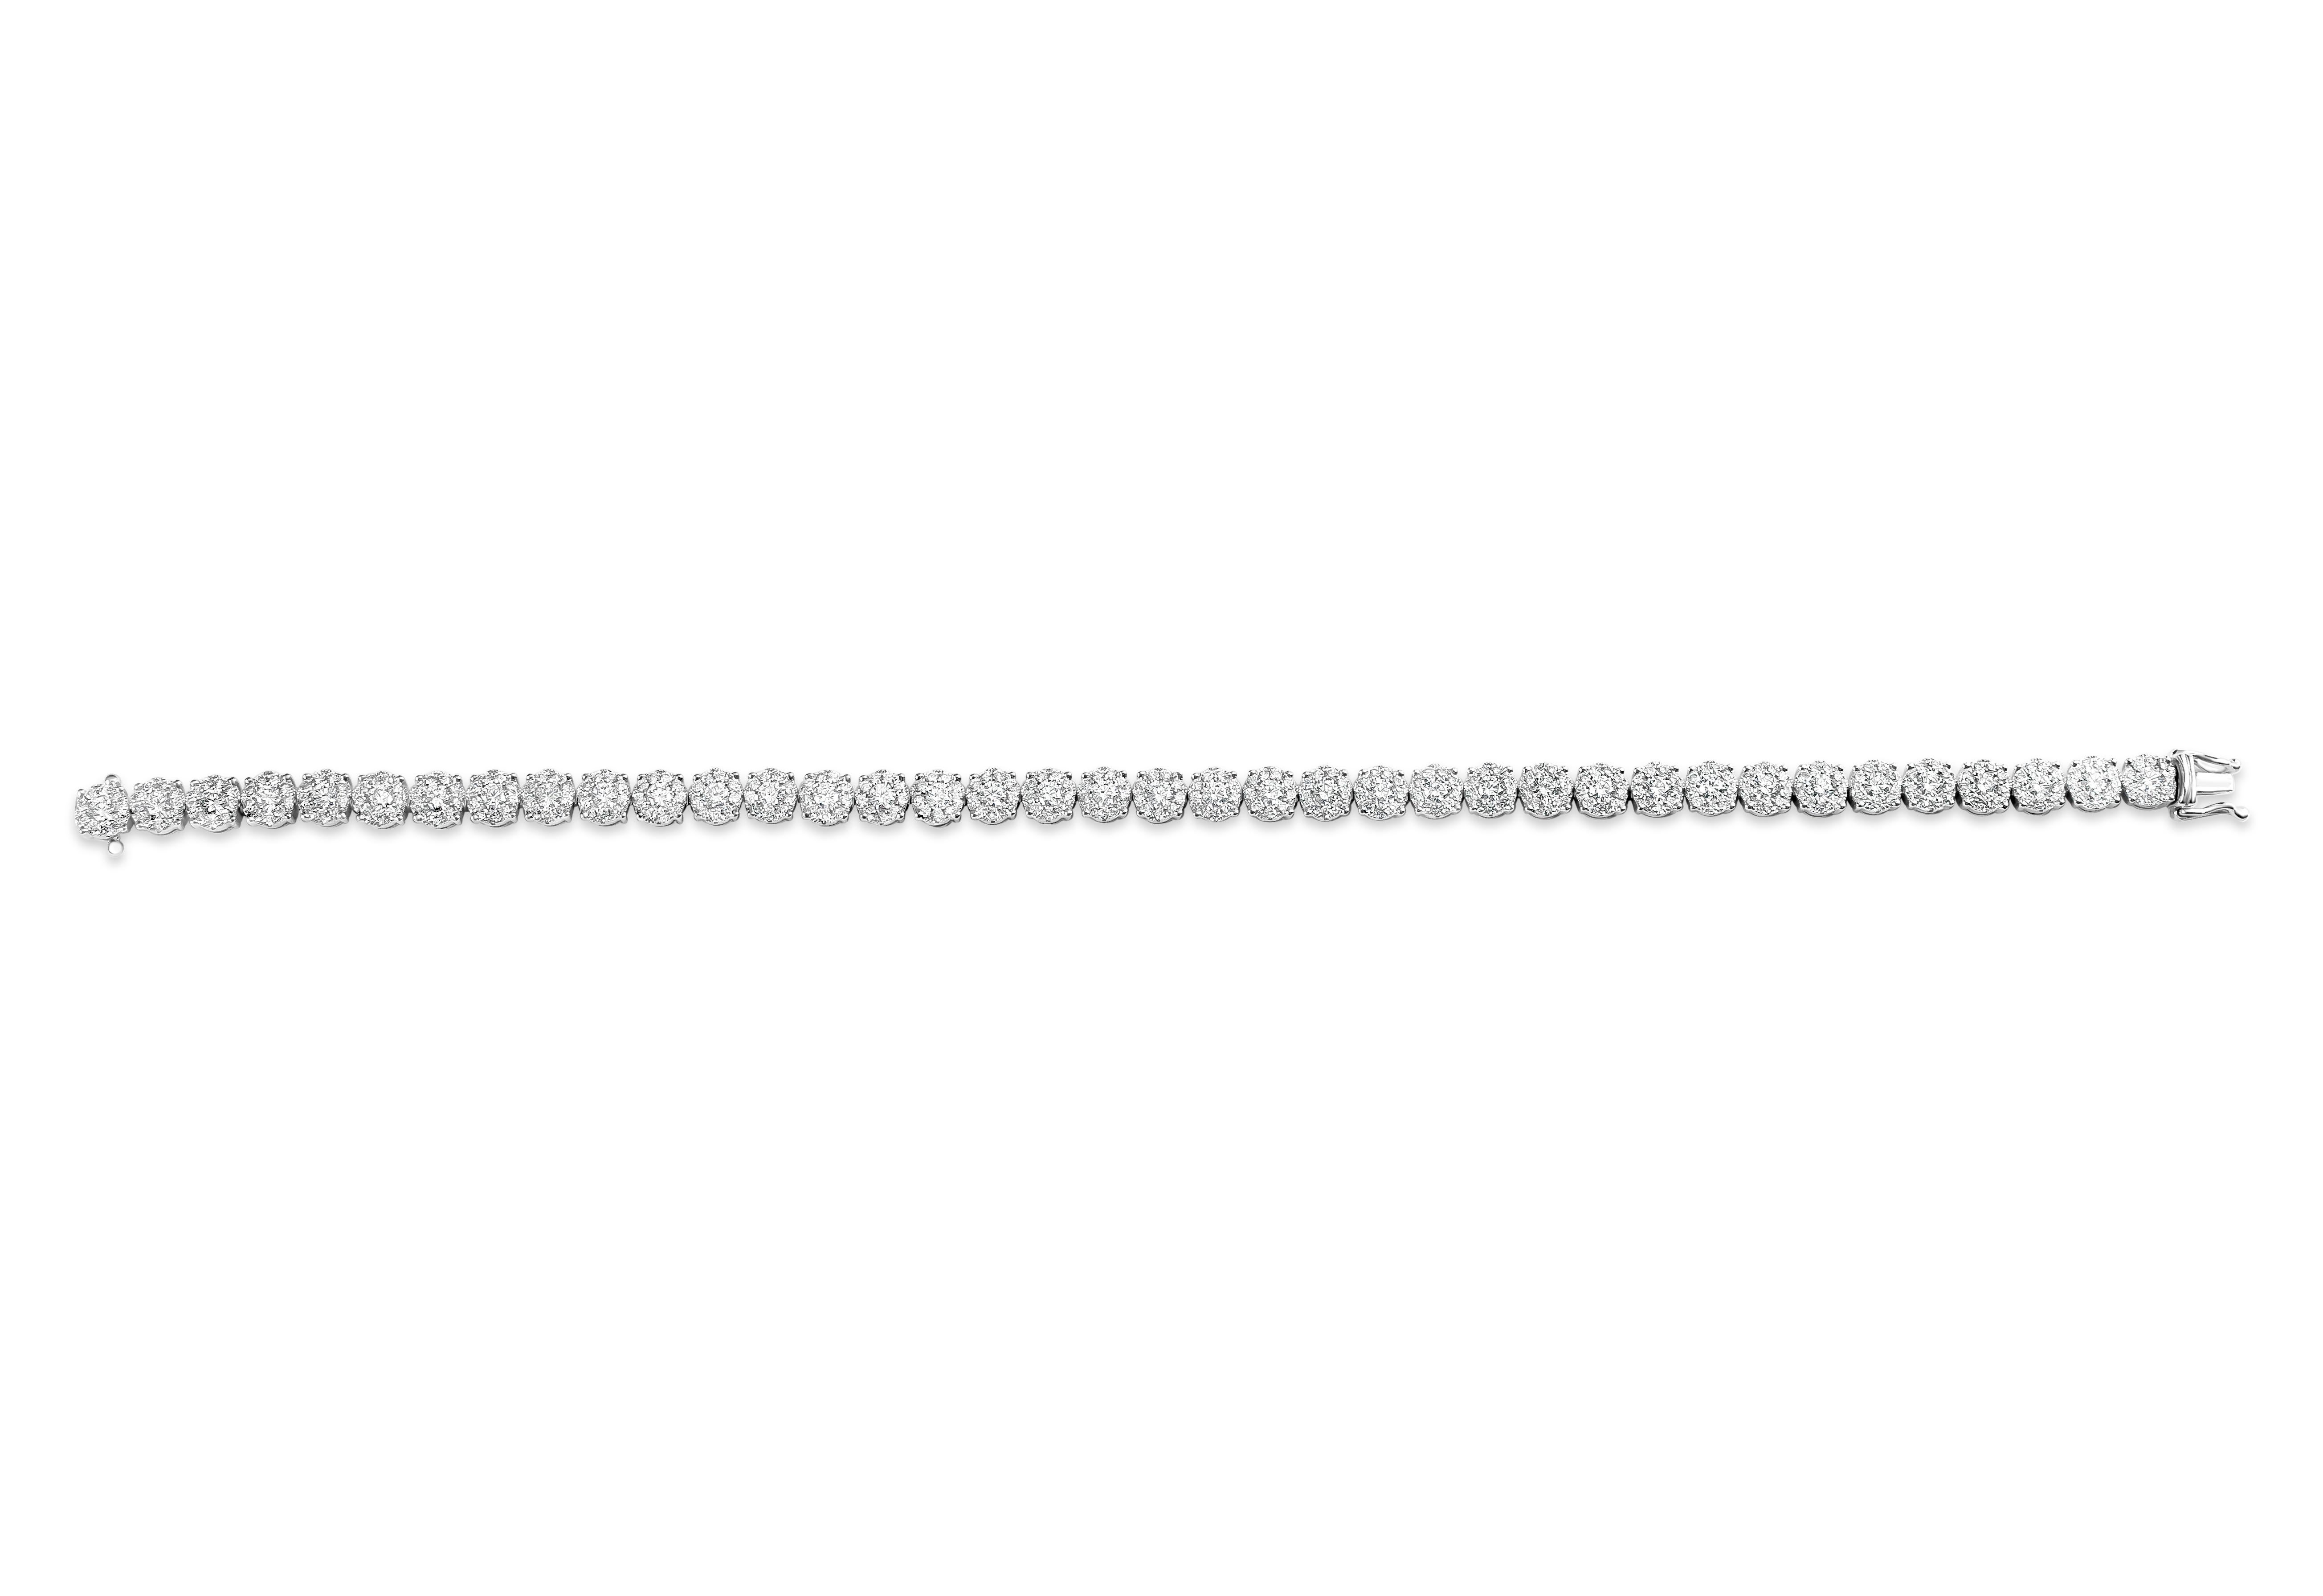 Brilliant tennis bracelet showcasing clusters of round diamonds set in a single row. Diamonds weigh 3.46 carats total. Made in 18 karat white gold.

